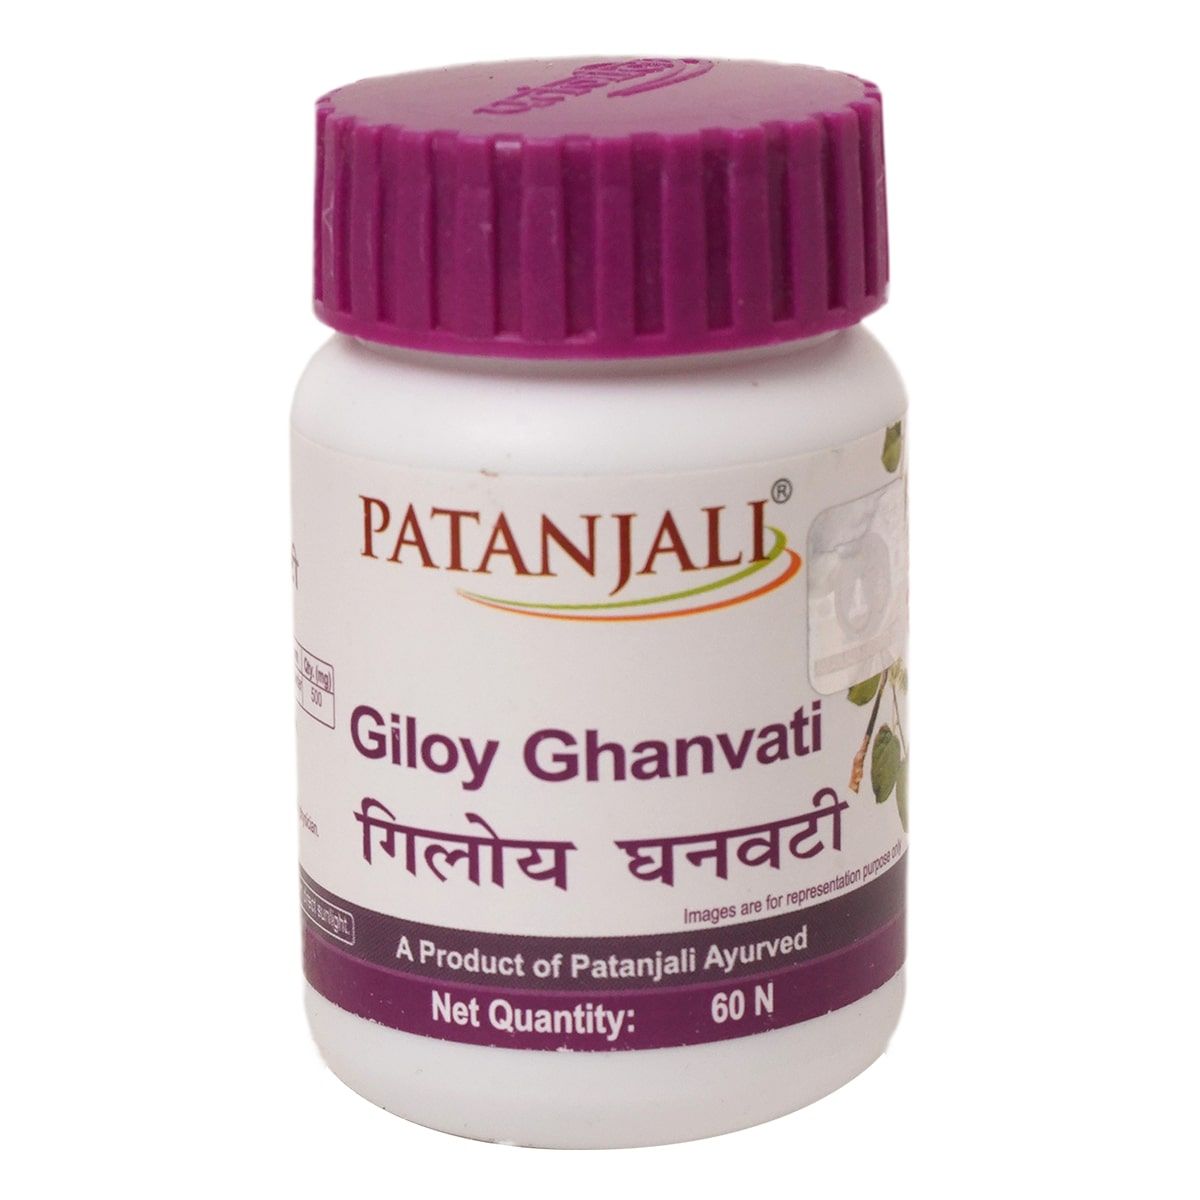 Patanjali Giloy Ghanvati, 60 Tablets, Pack of 1 